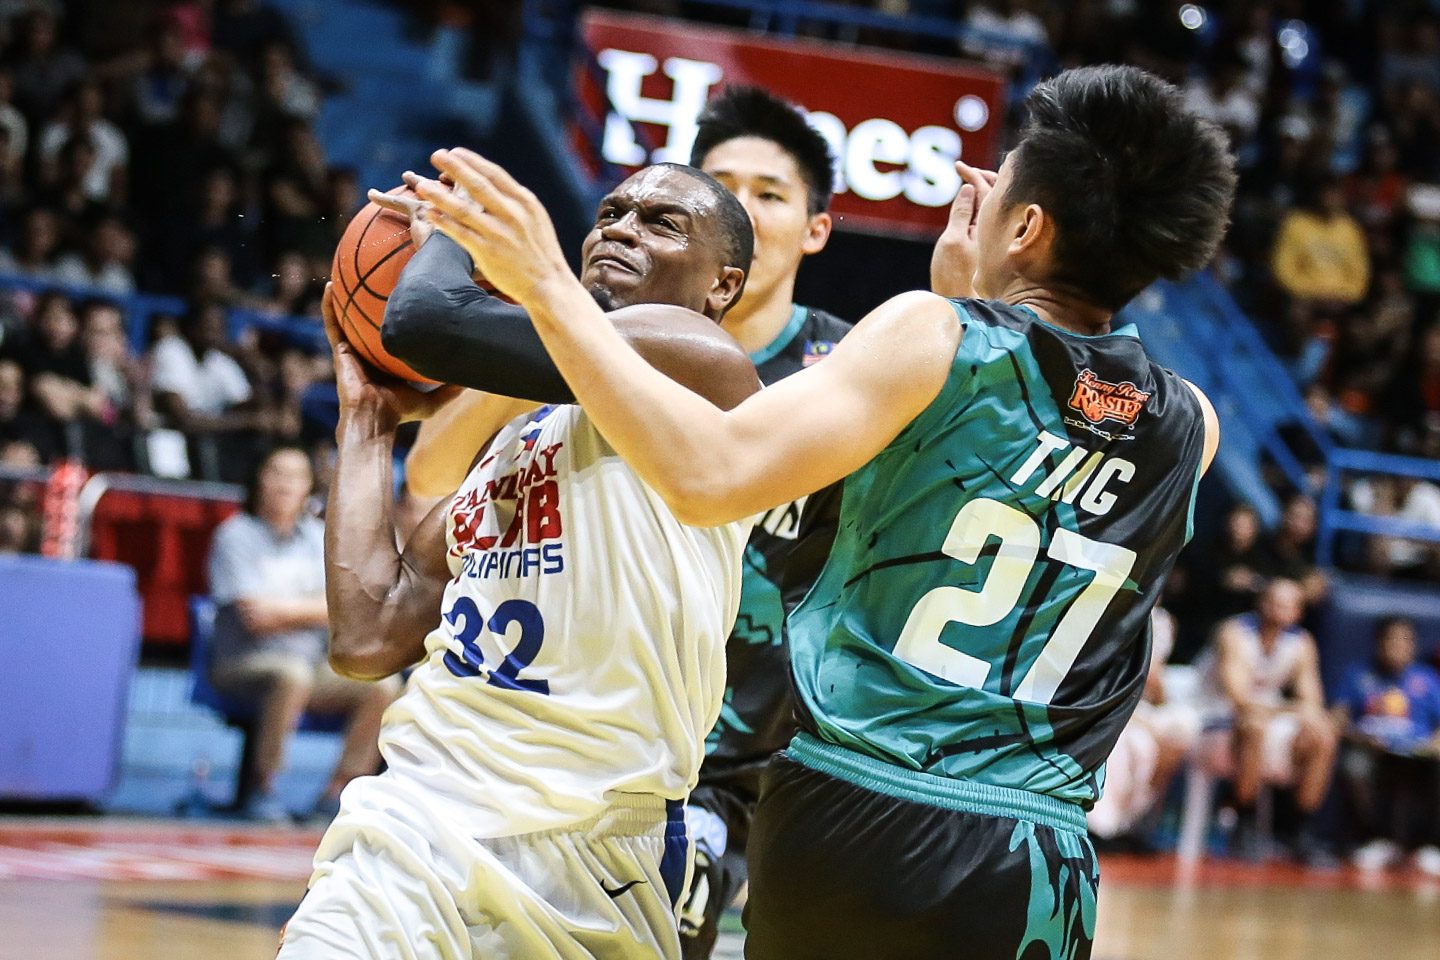 San Miguel takes over Alab Pilipinas in the ABL